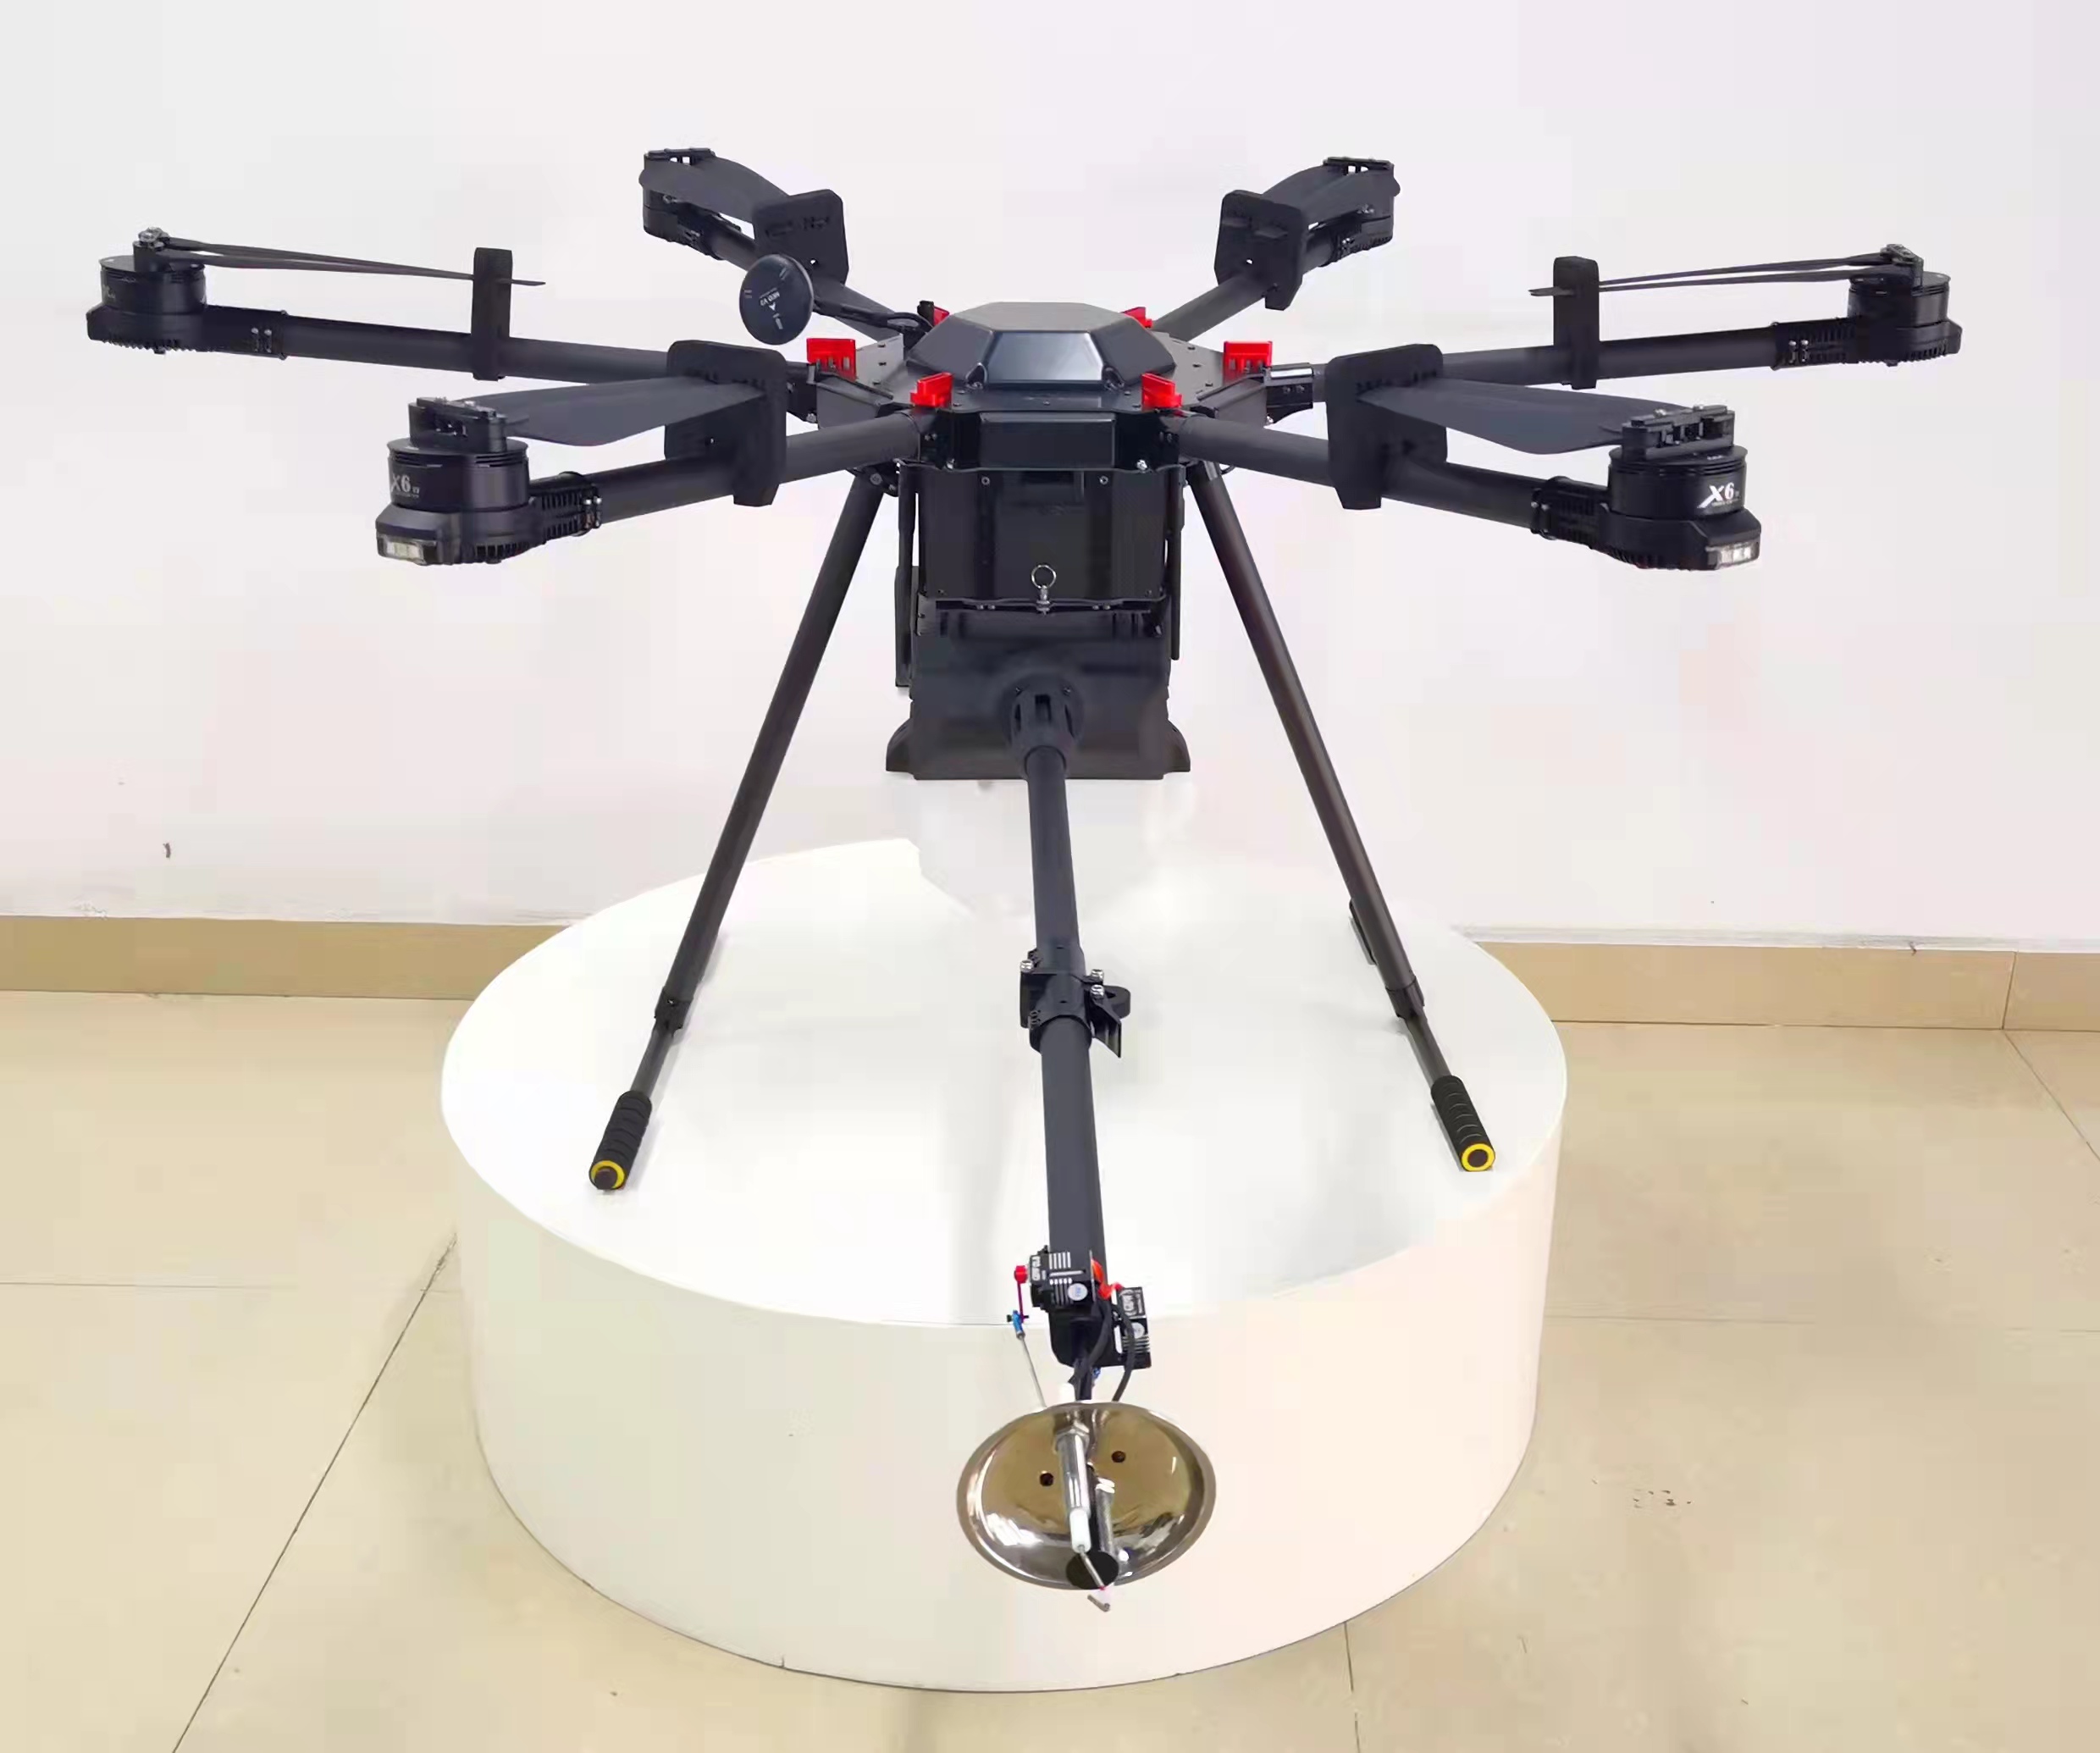 FD1200 hexacopter drone hexacopter drone frame for 60 minutes endurance